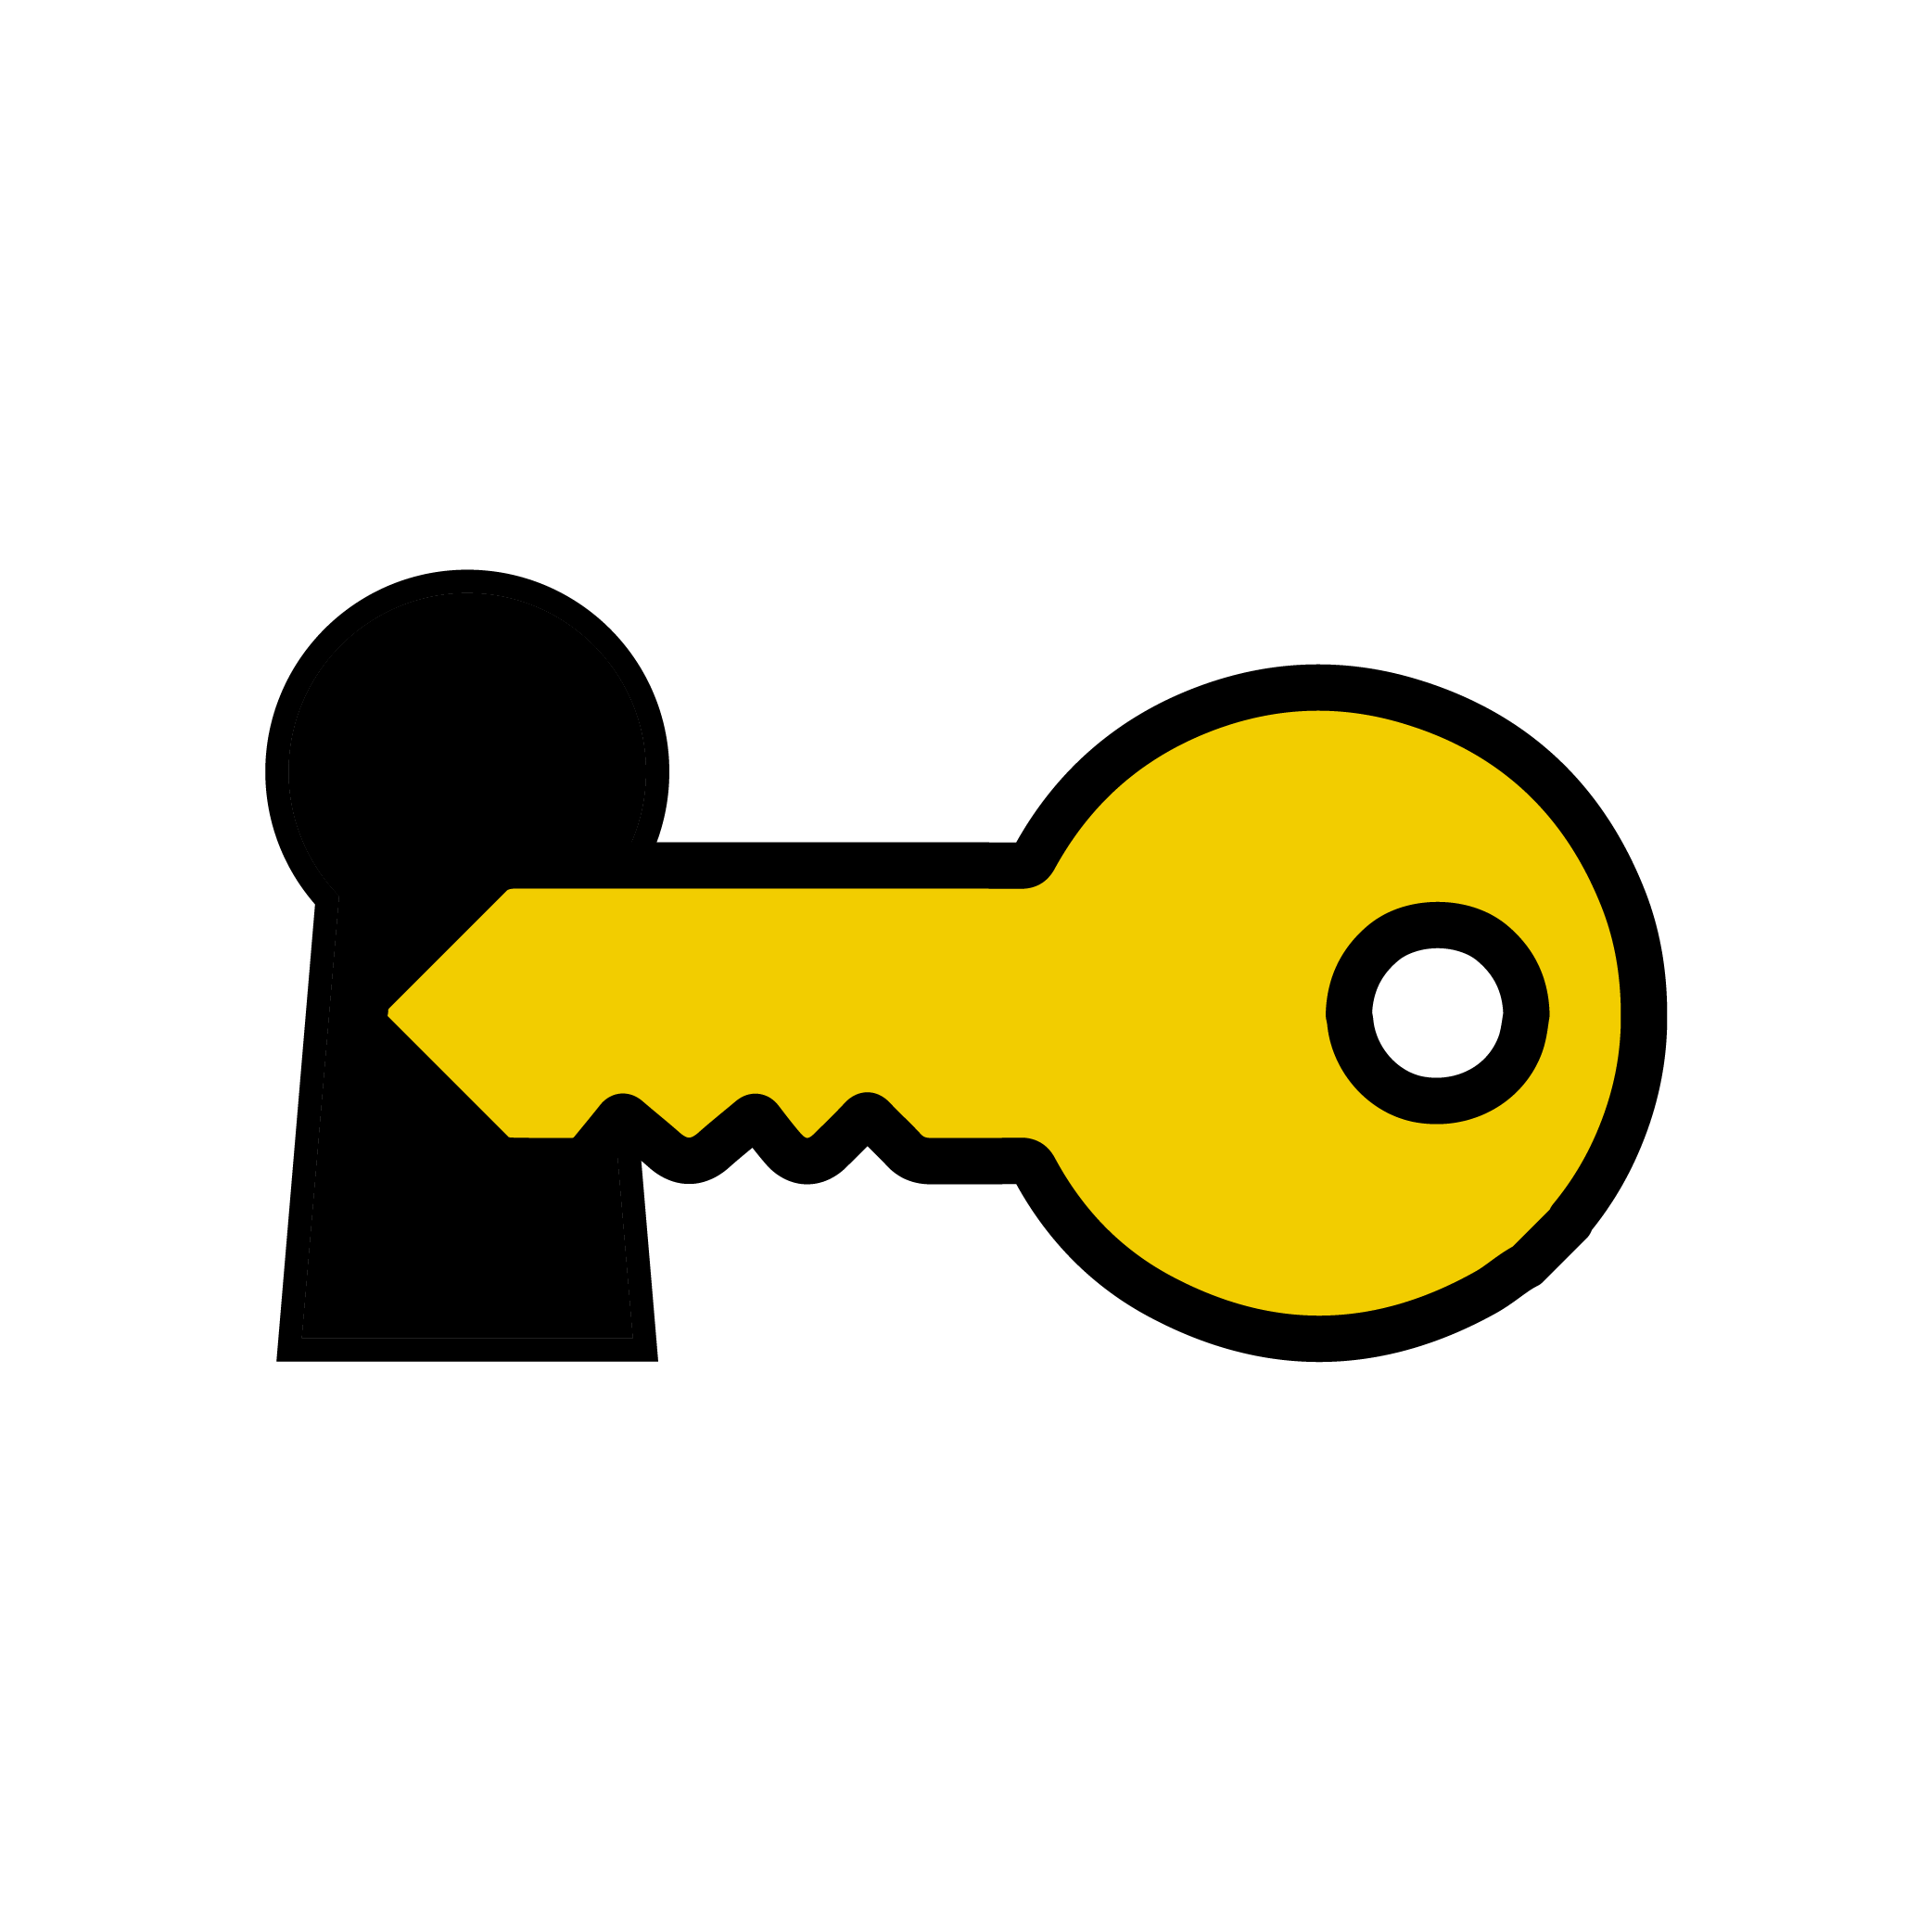 Key Requisition and Lock Services | Facilities & Operations